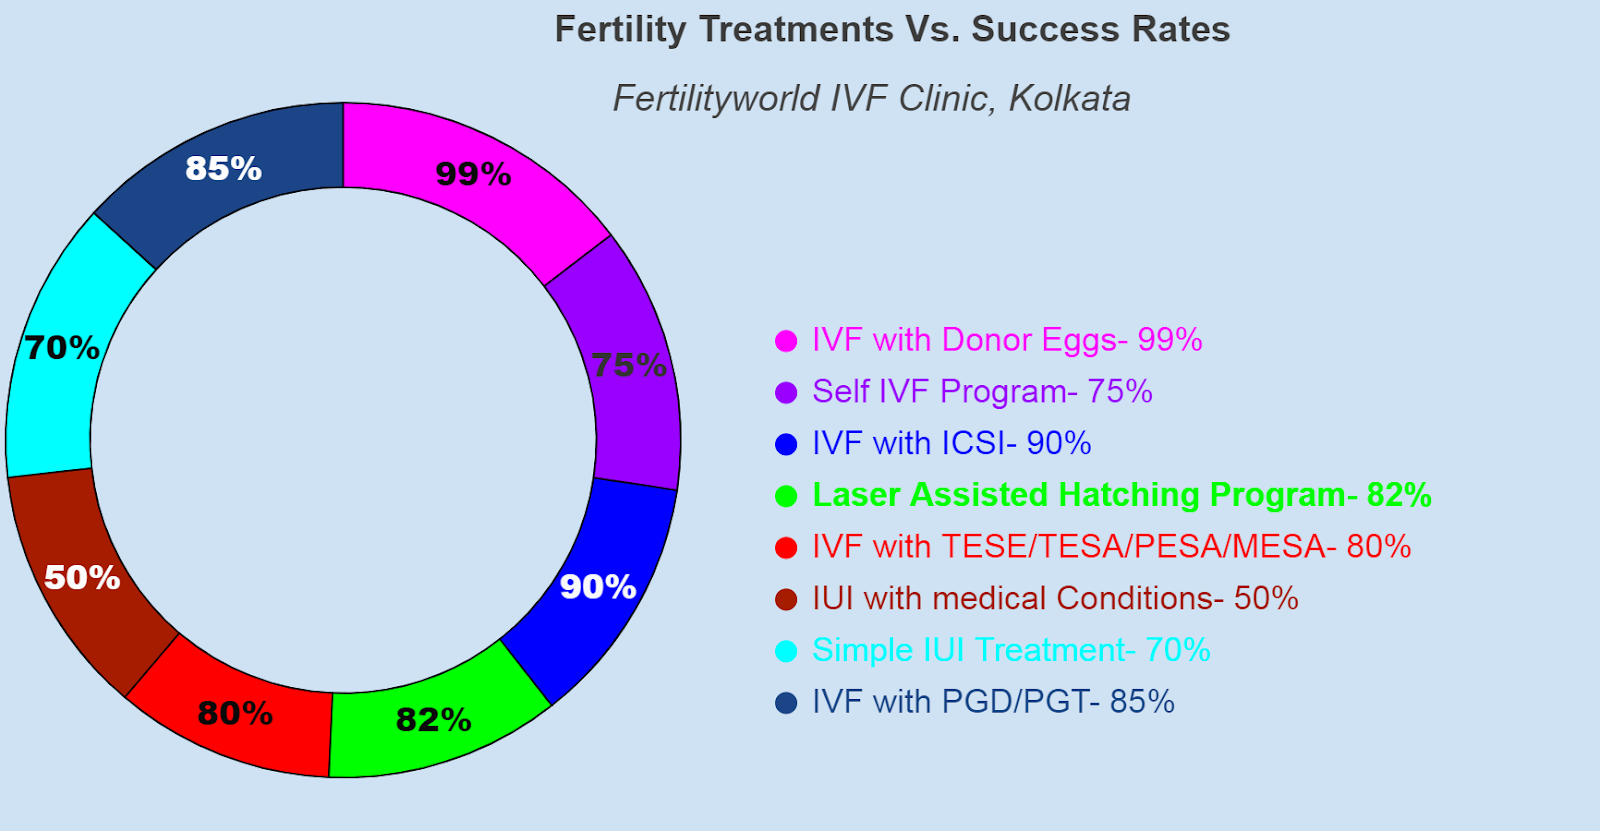 Which IVF clinic has the highest success rate in Kolkata